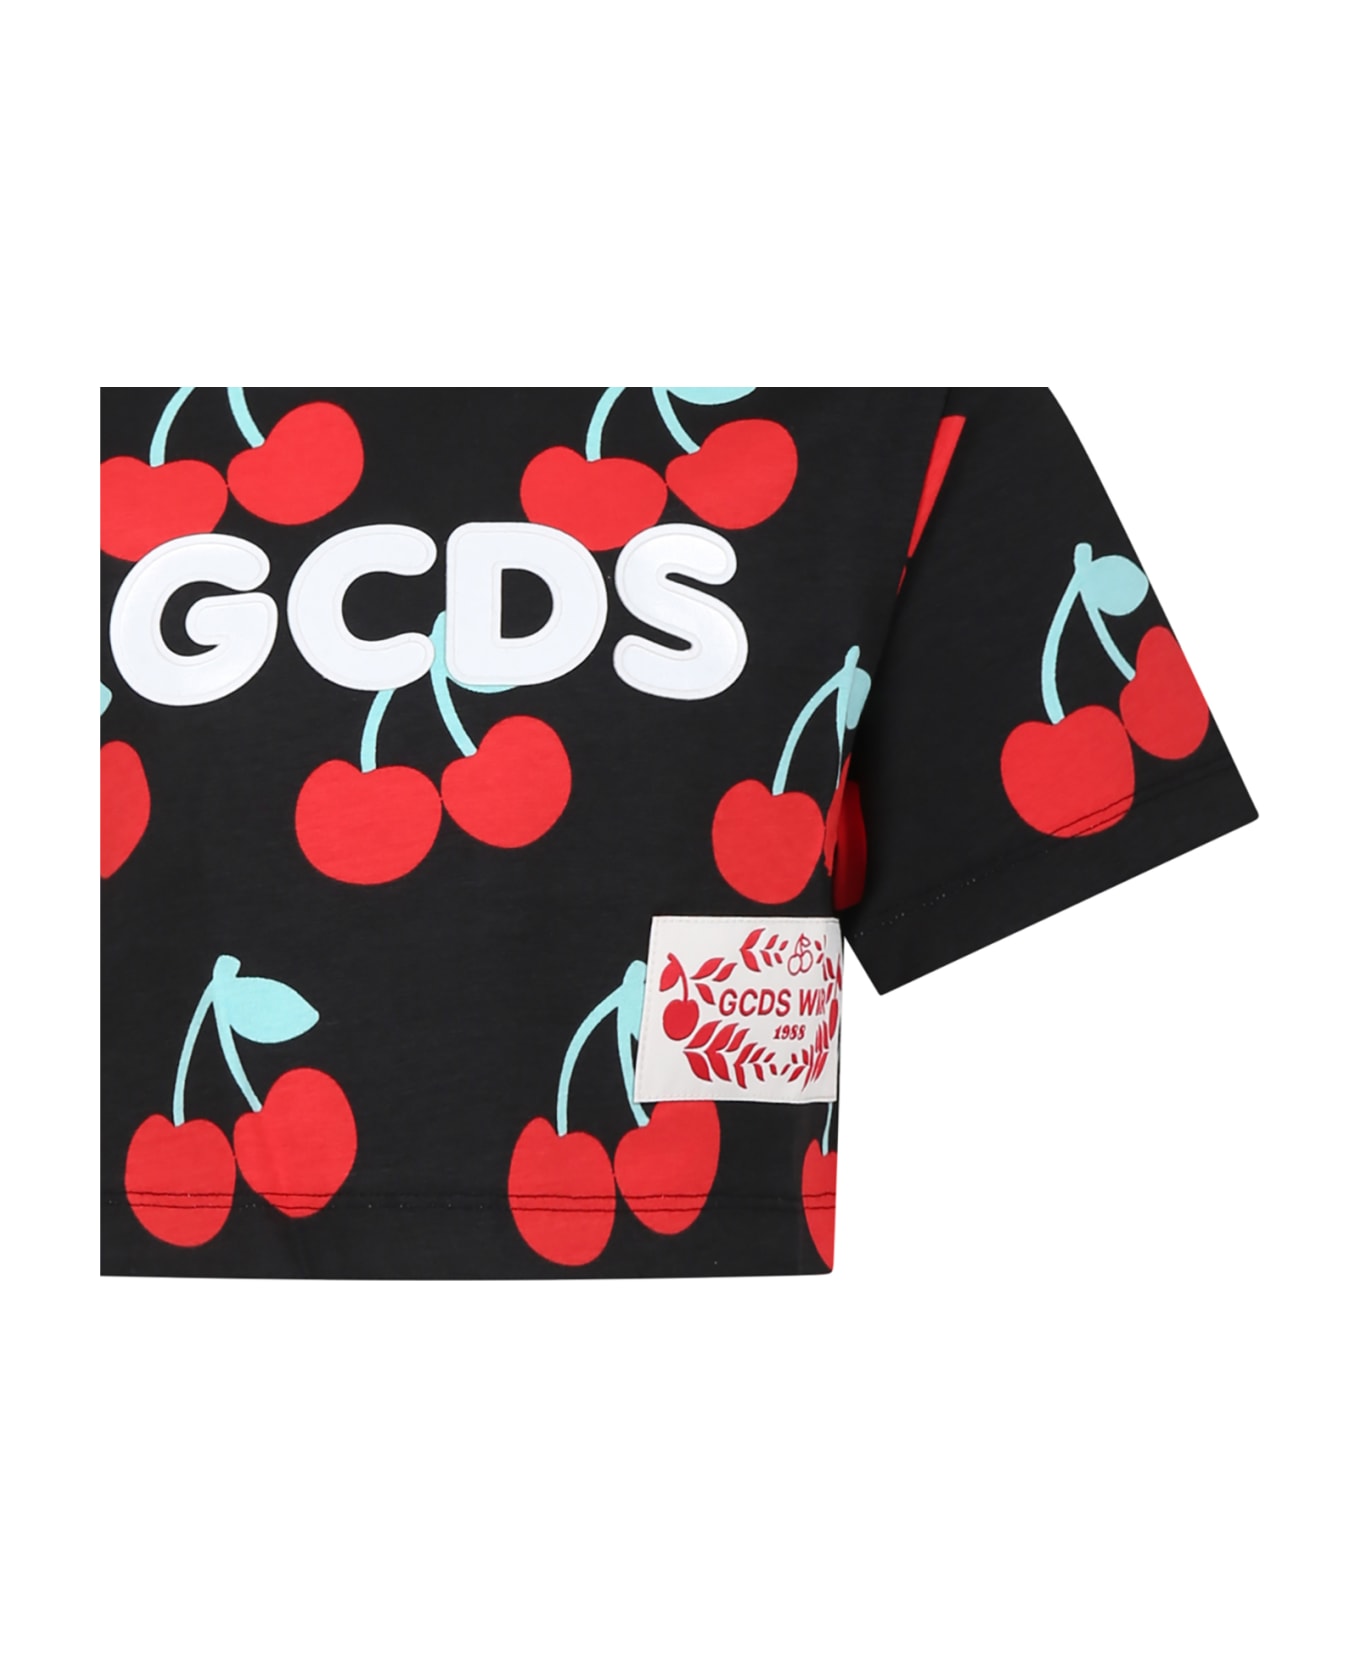 GCDS Mini Black T-shirt For Girl With All-over Cherry Print - Black